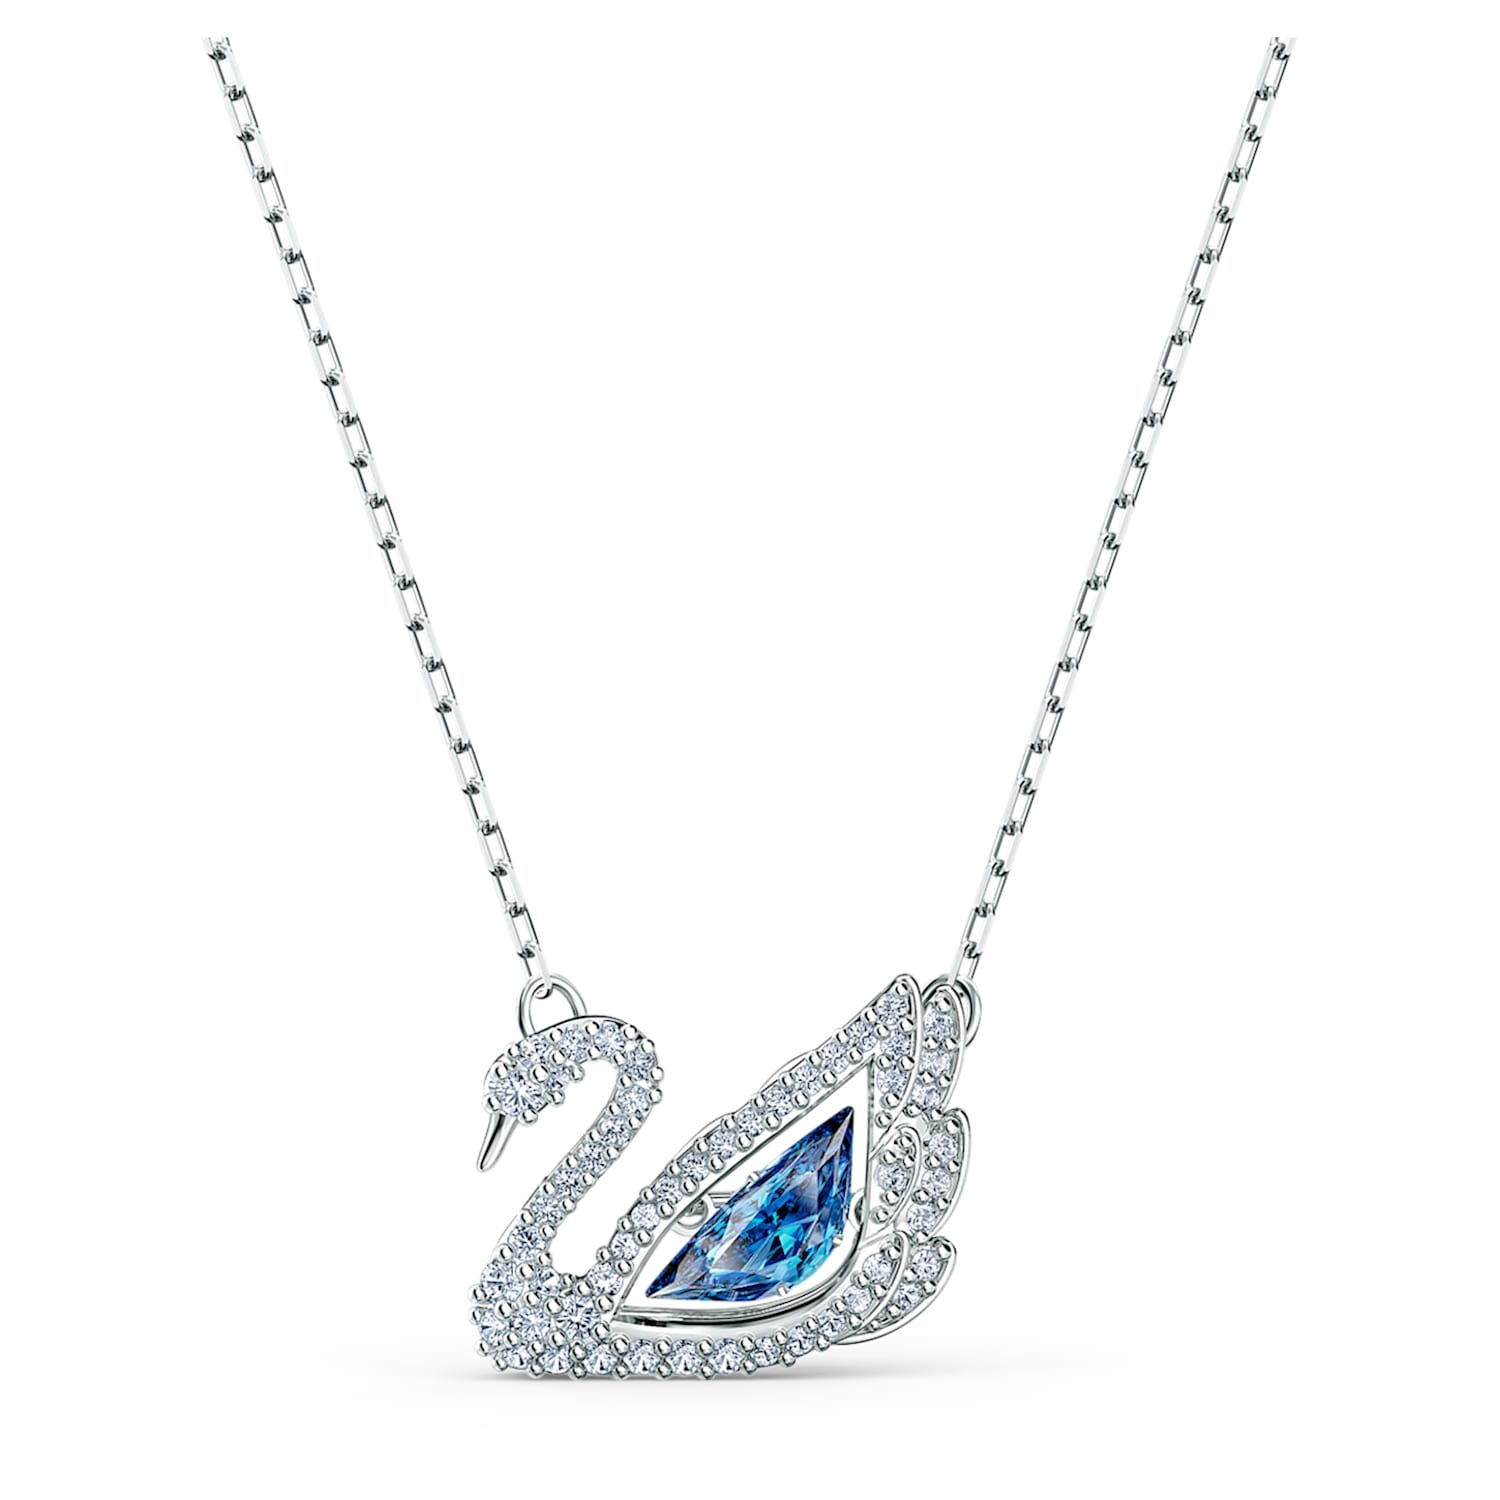 DÂY CHUYỀN NỮ DANCING SWAN NECKLACE, BLUE, RHODIUM PLATED 12